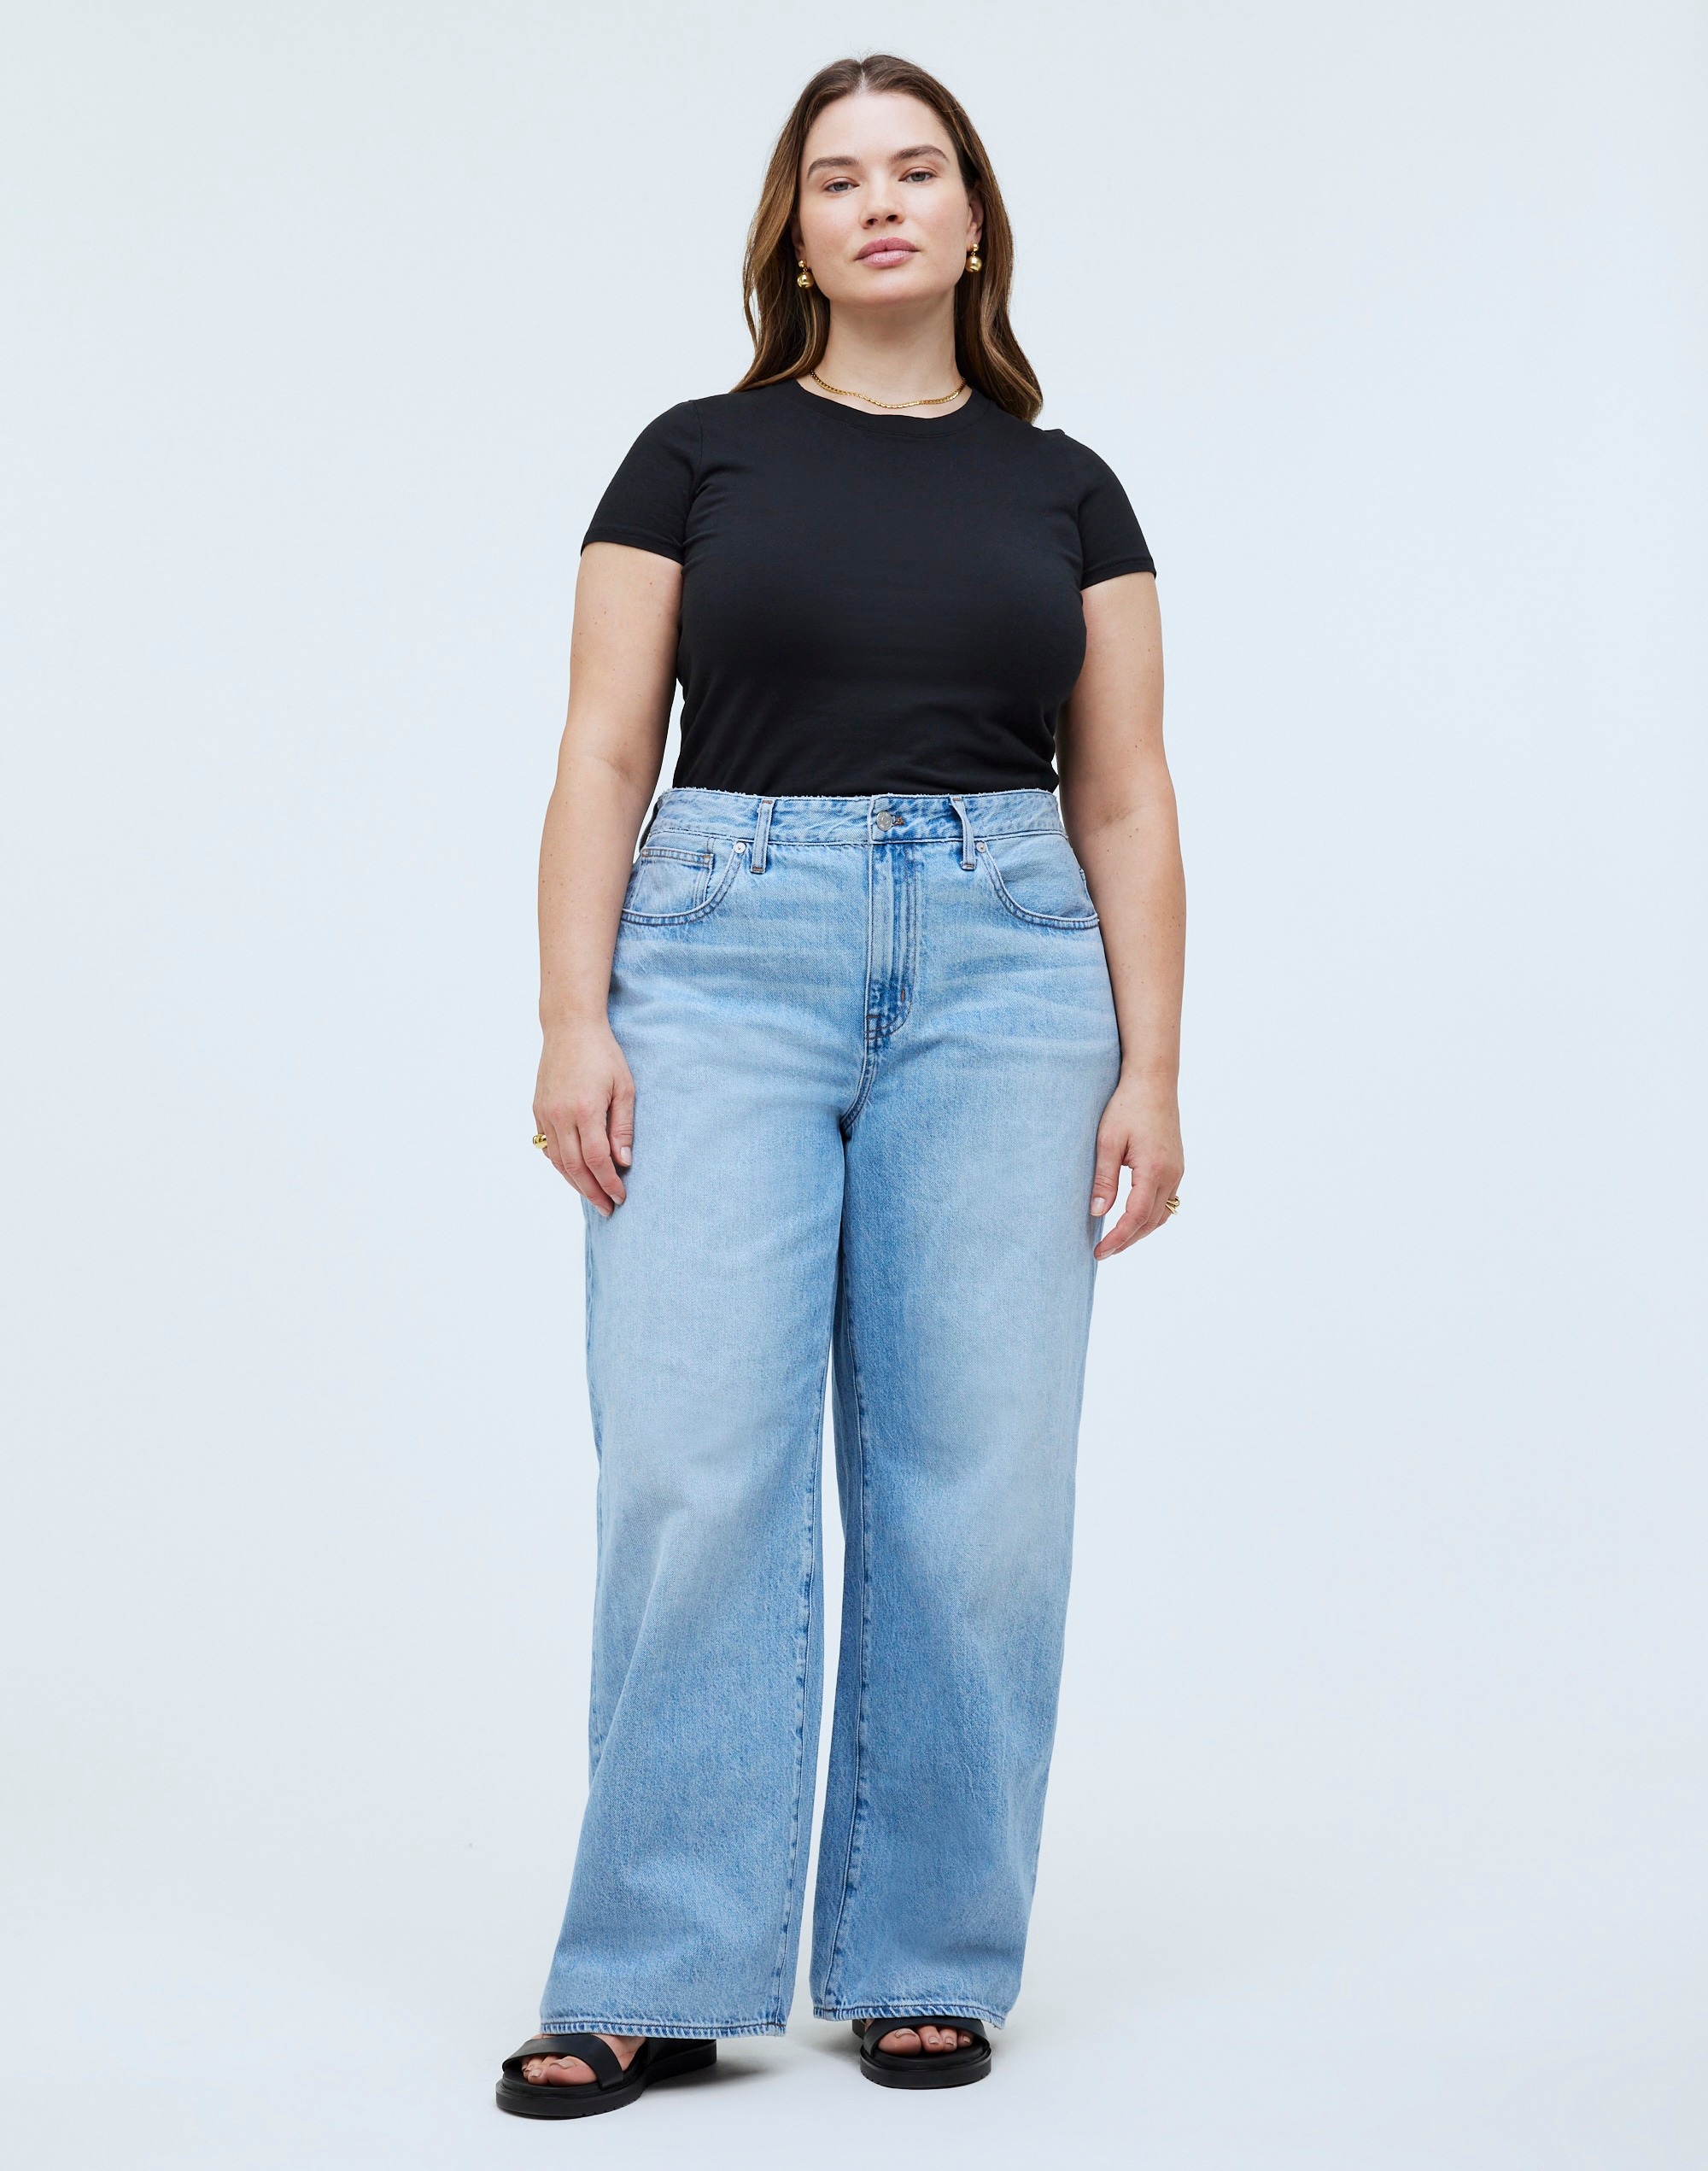 Plus Superwide-Leg Jeans in Ahern Wash: Airy Denim Edition